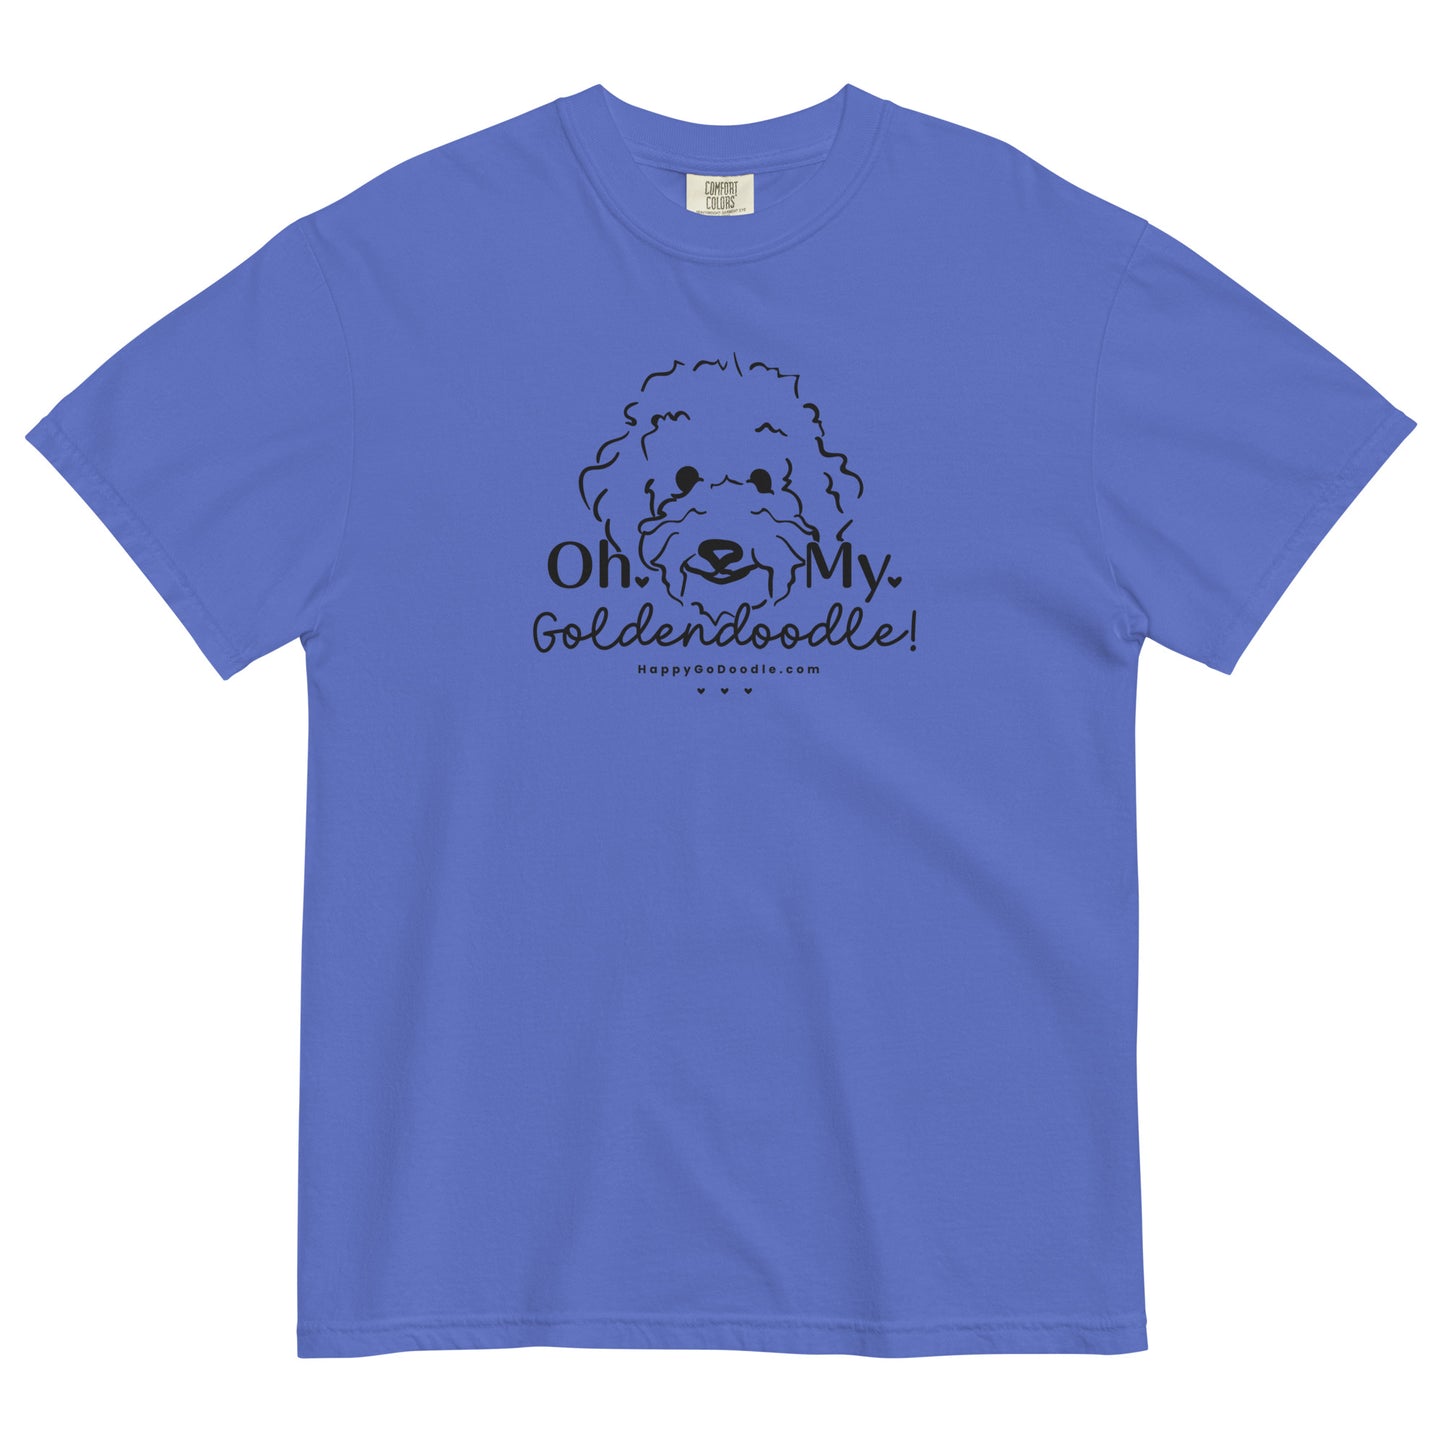 Goldendoodle comfort colors t-shirt with Goldendoodle face and words "Oh My Goldendoodle" in flo blue color